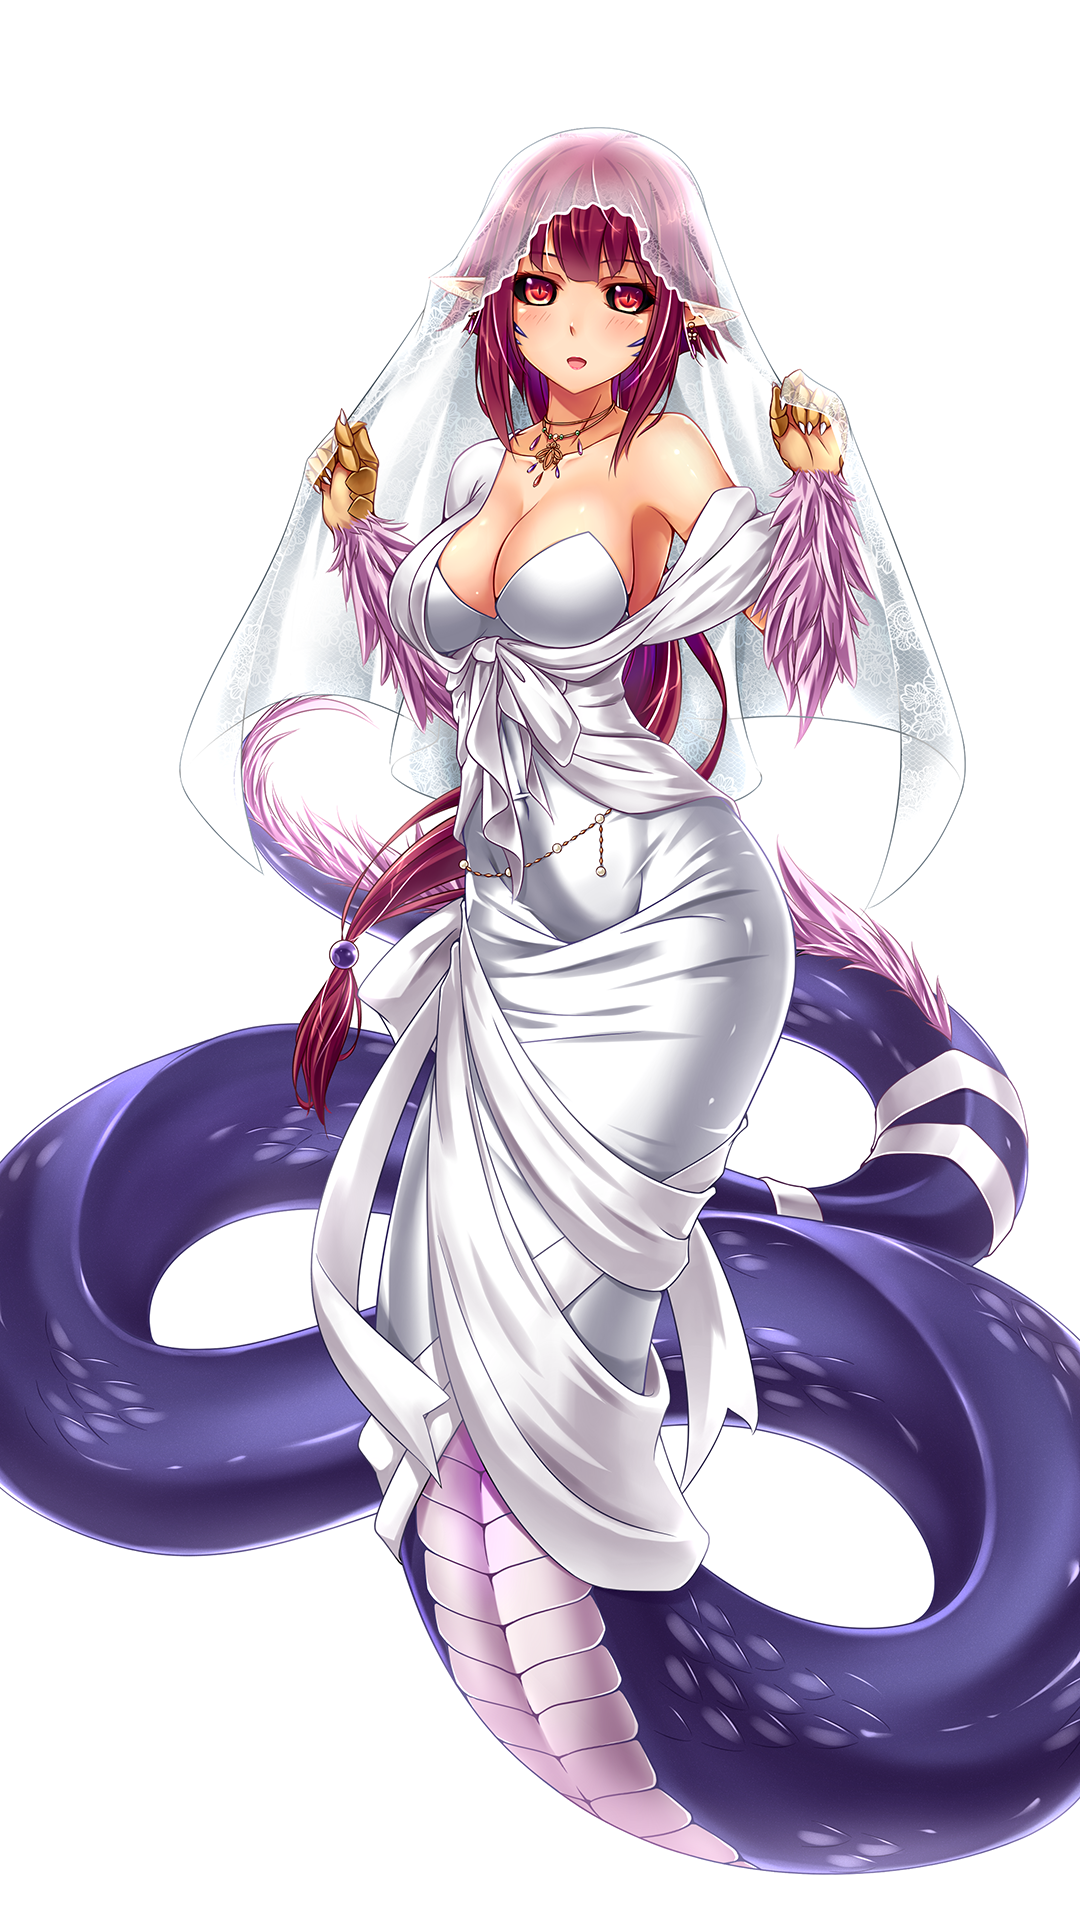 Anime 1080x1920 anime anime girls cleavage Lamia long hair white dress red eyes necklace